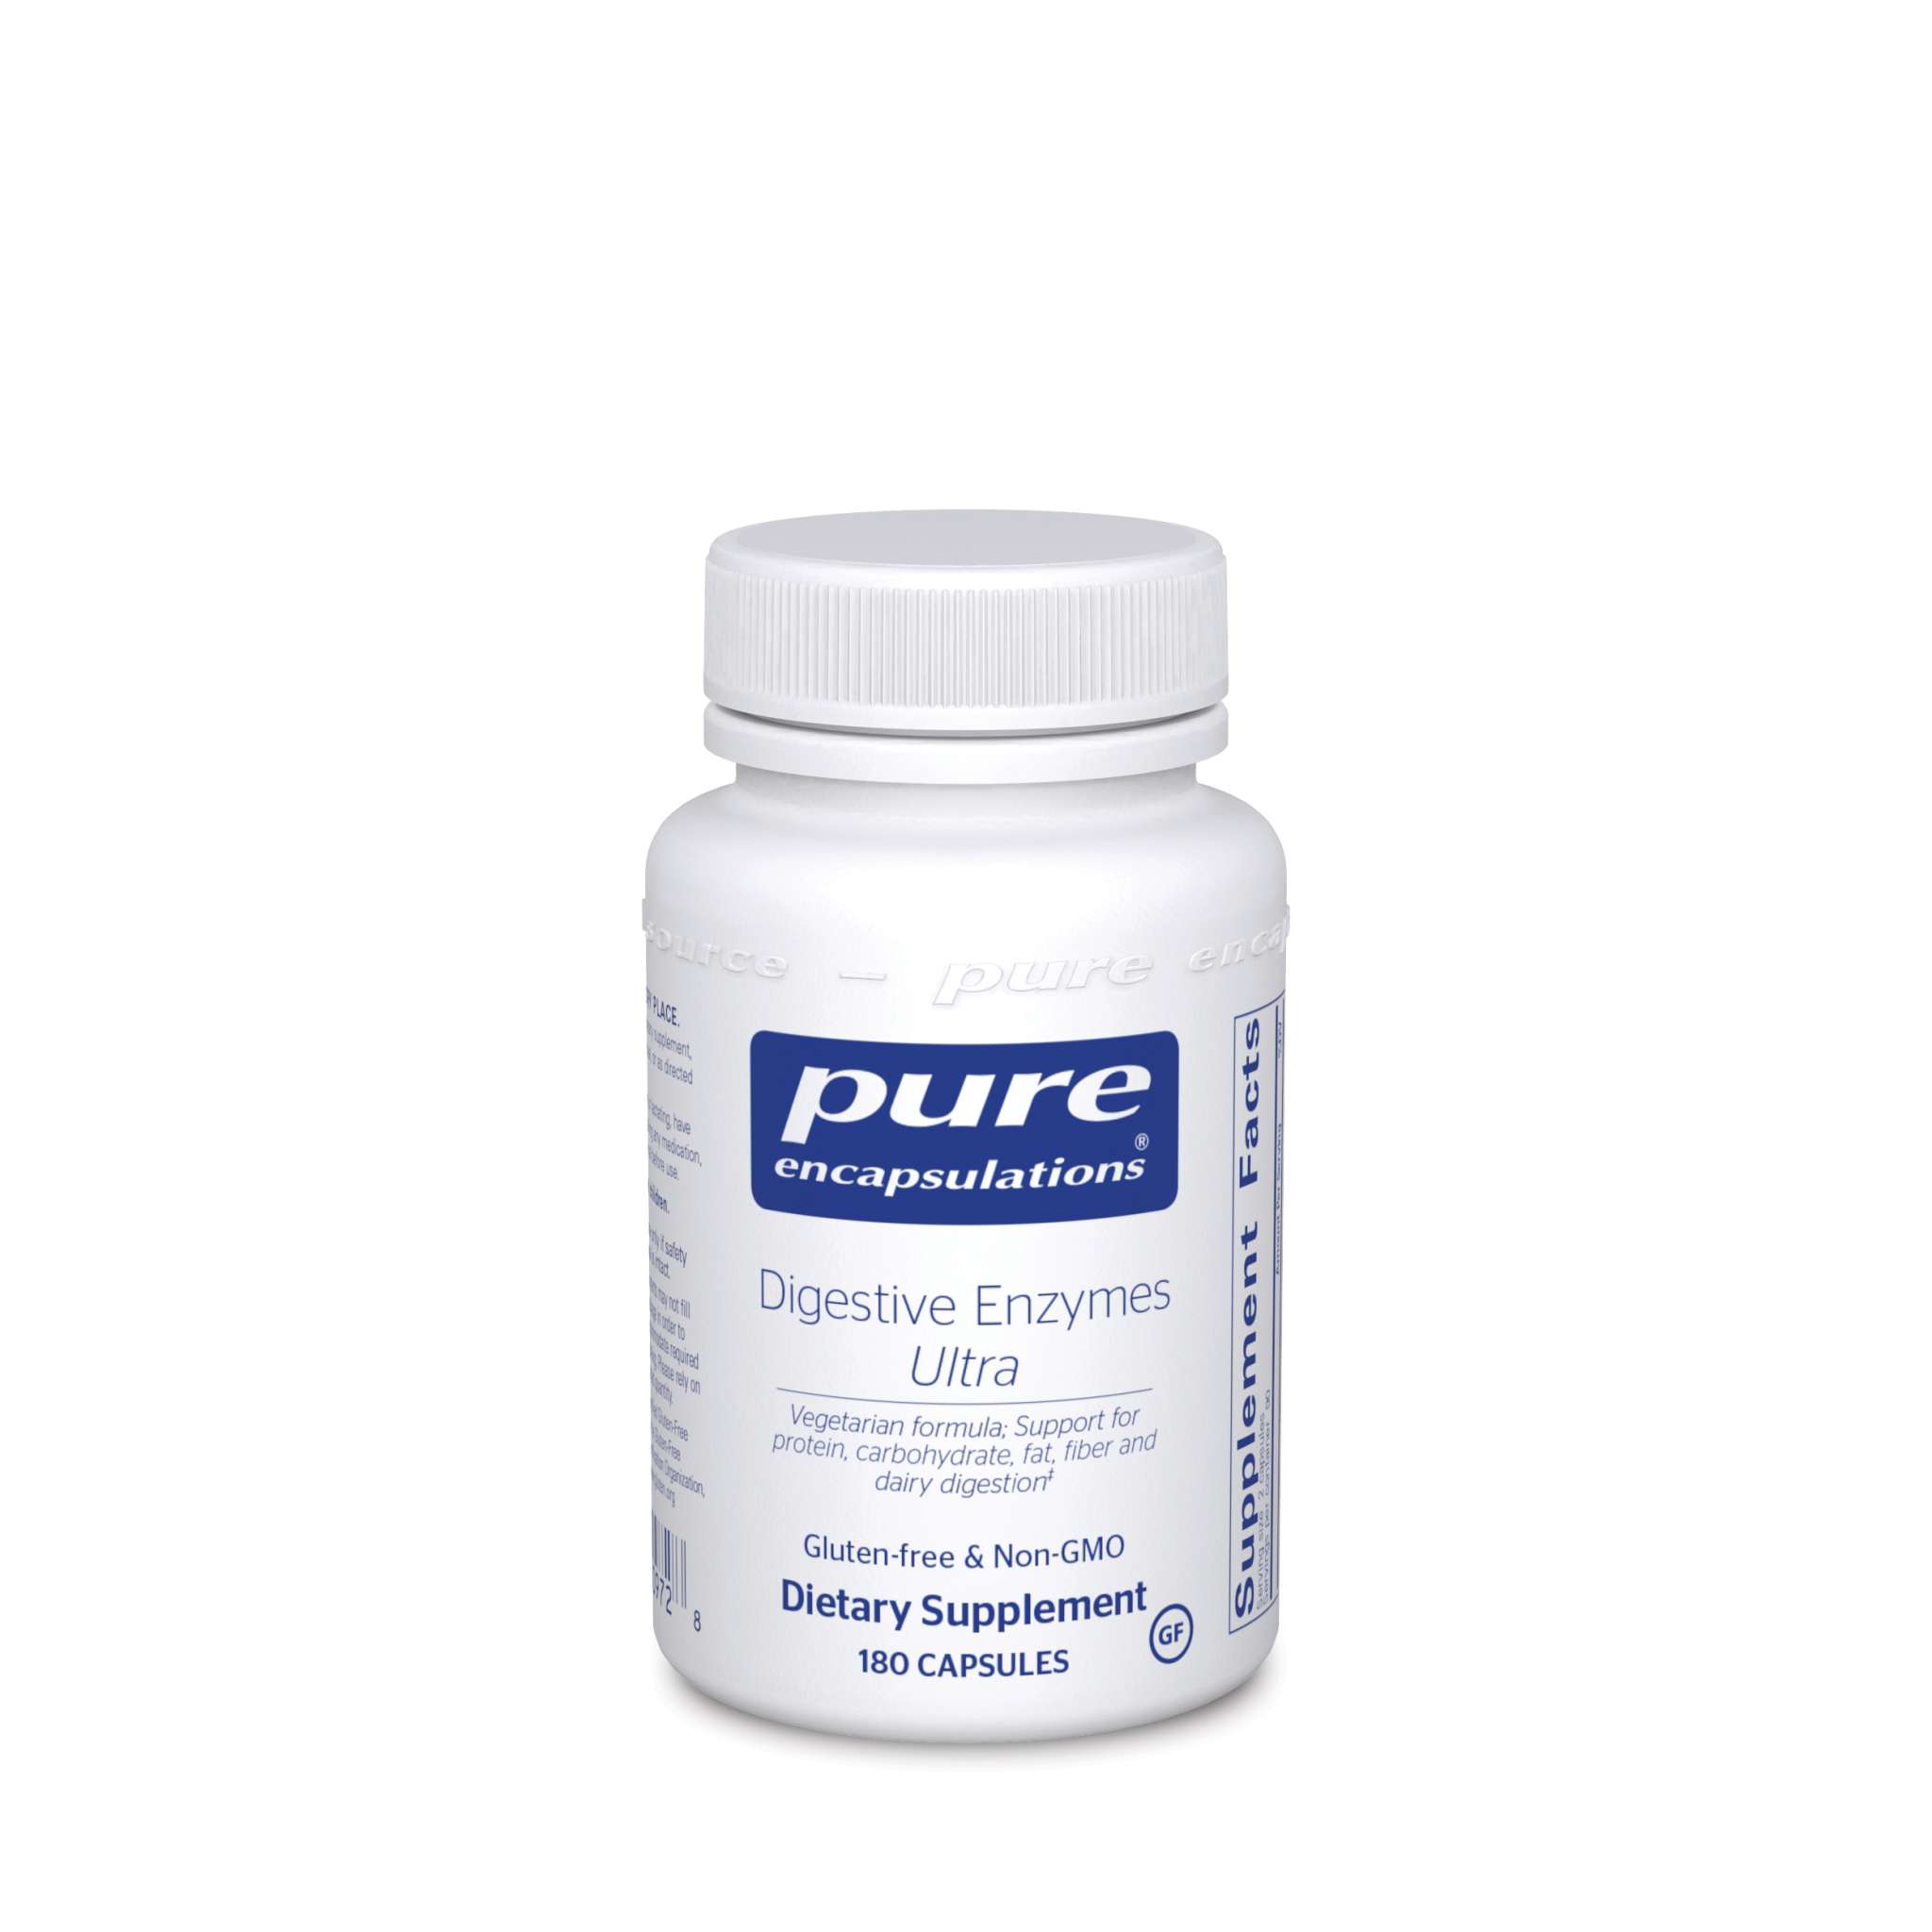 Pure Encapsulations - Digestive Enzymes Ultra